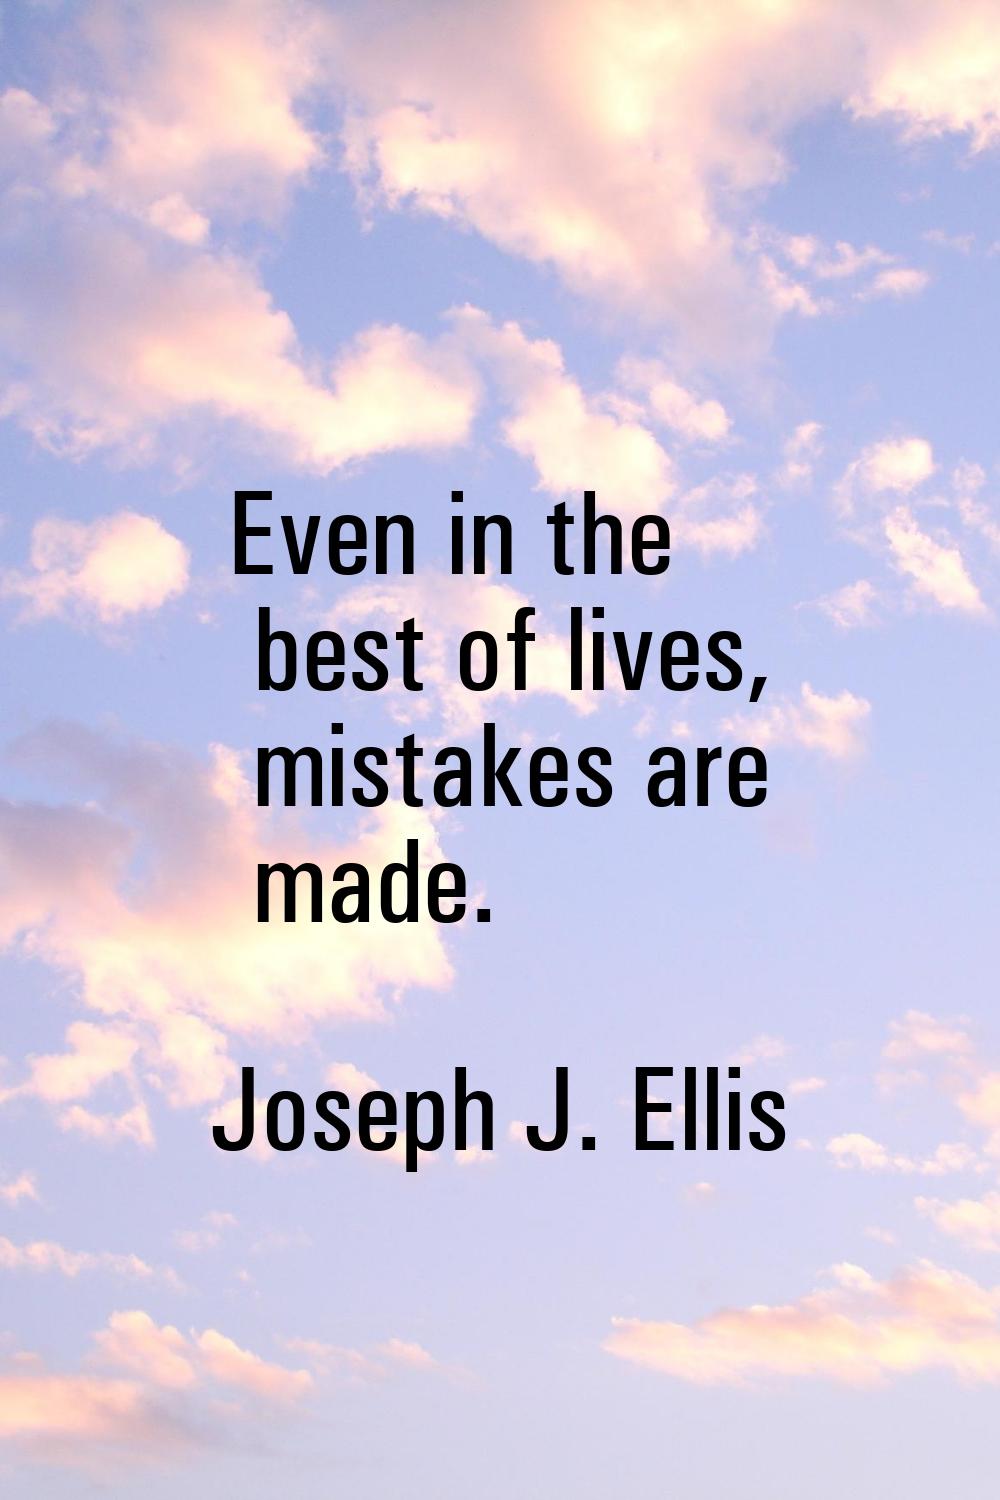 Even in the best of lives, mistakes are made.